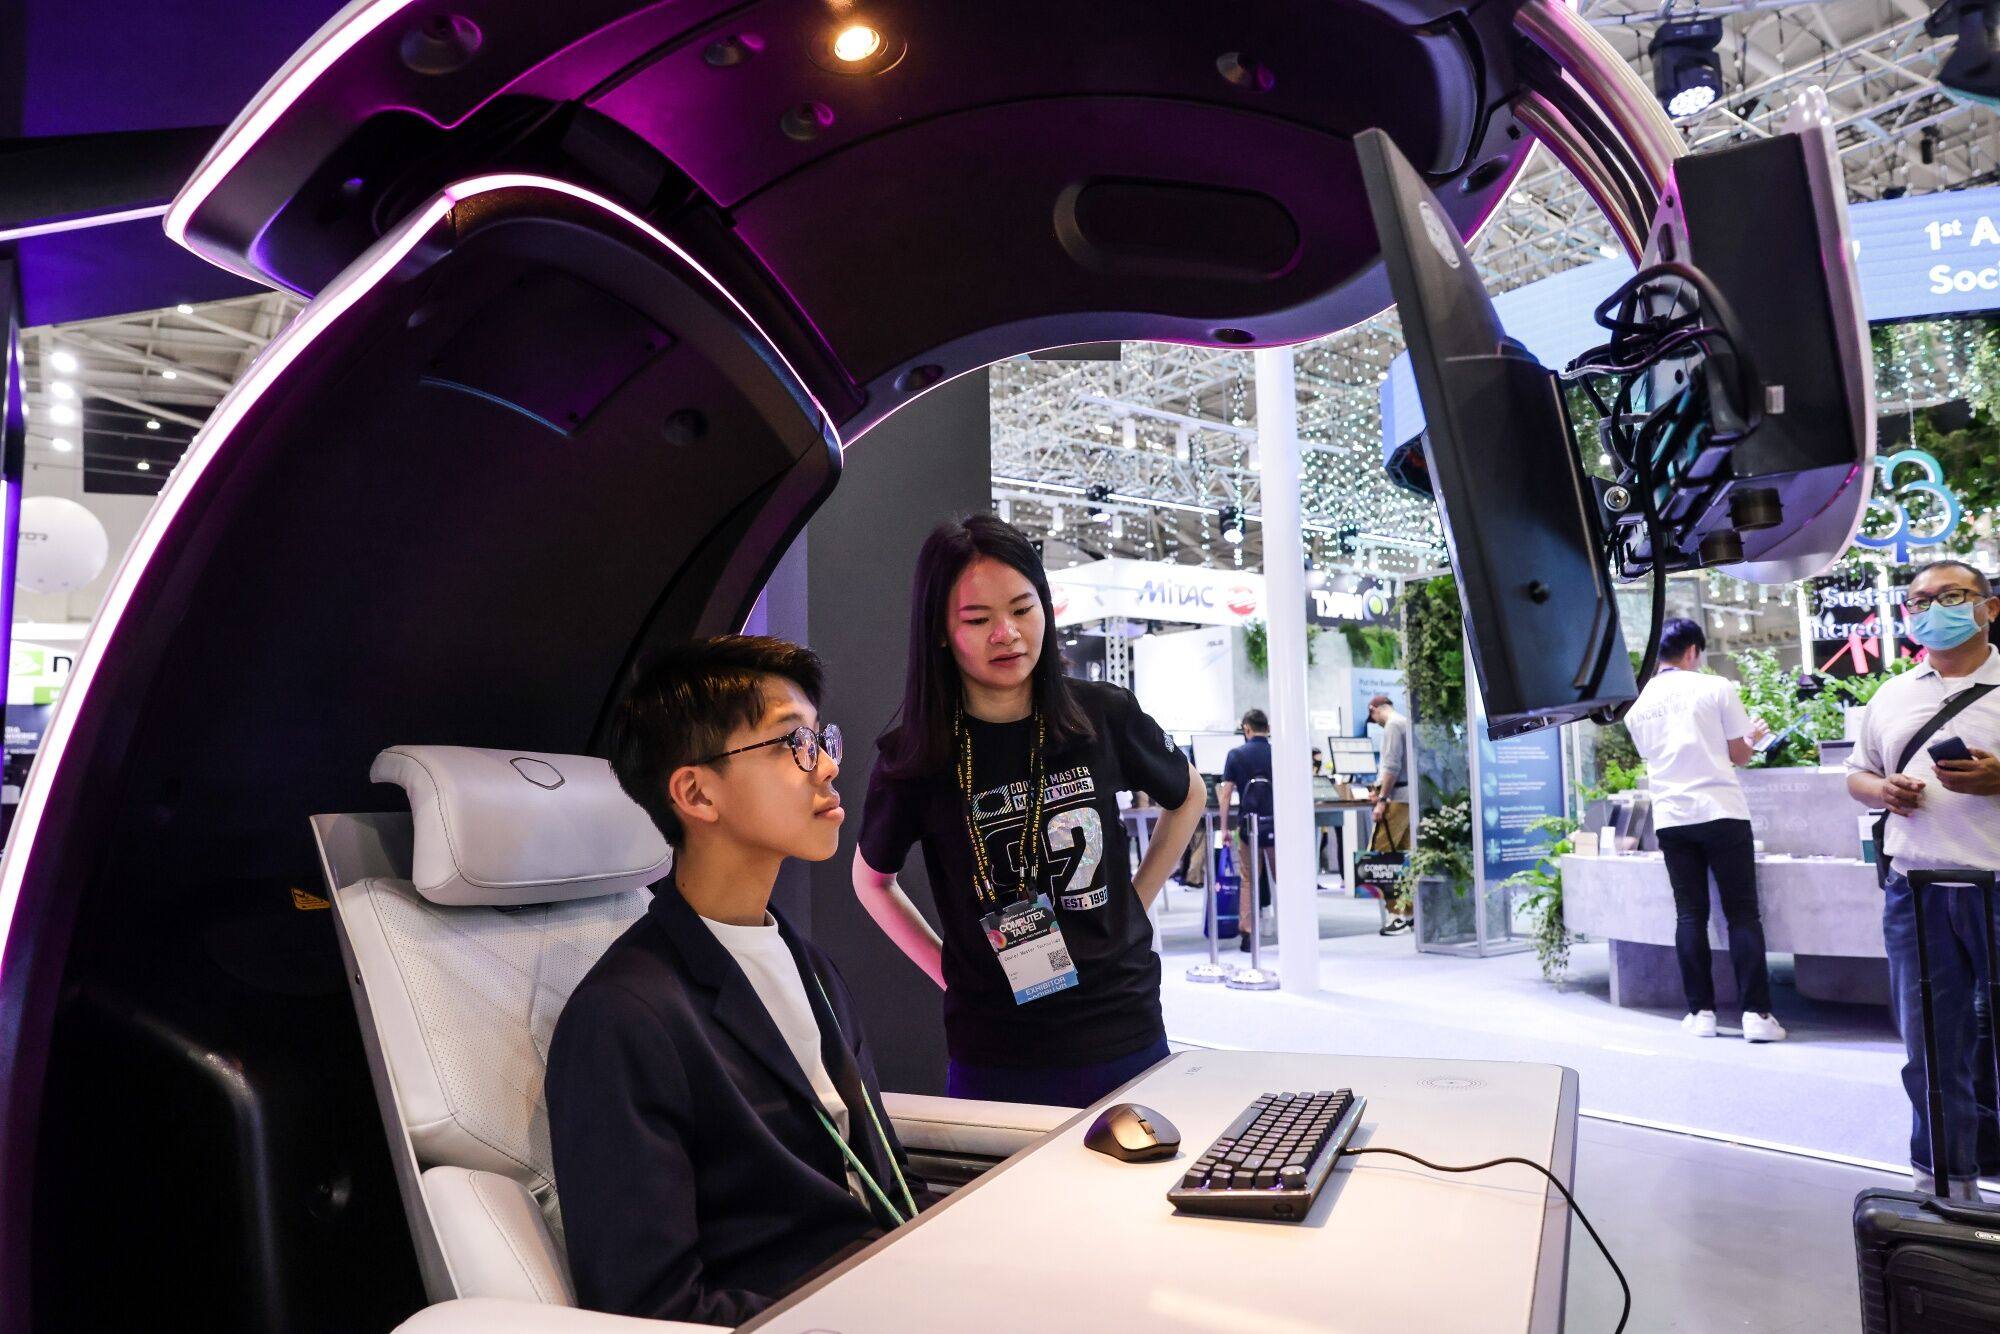 A visitor tries an immersive gaming device during the Computex Taipei expo on Tuesday. The trade show runs through Friday. Photo: Bloomberg